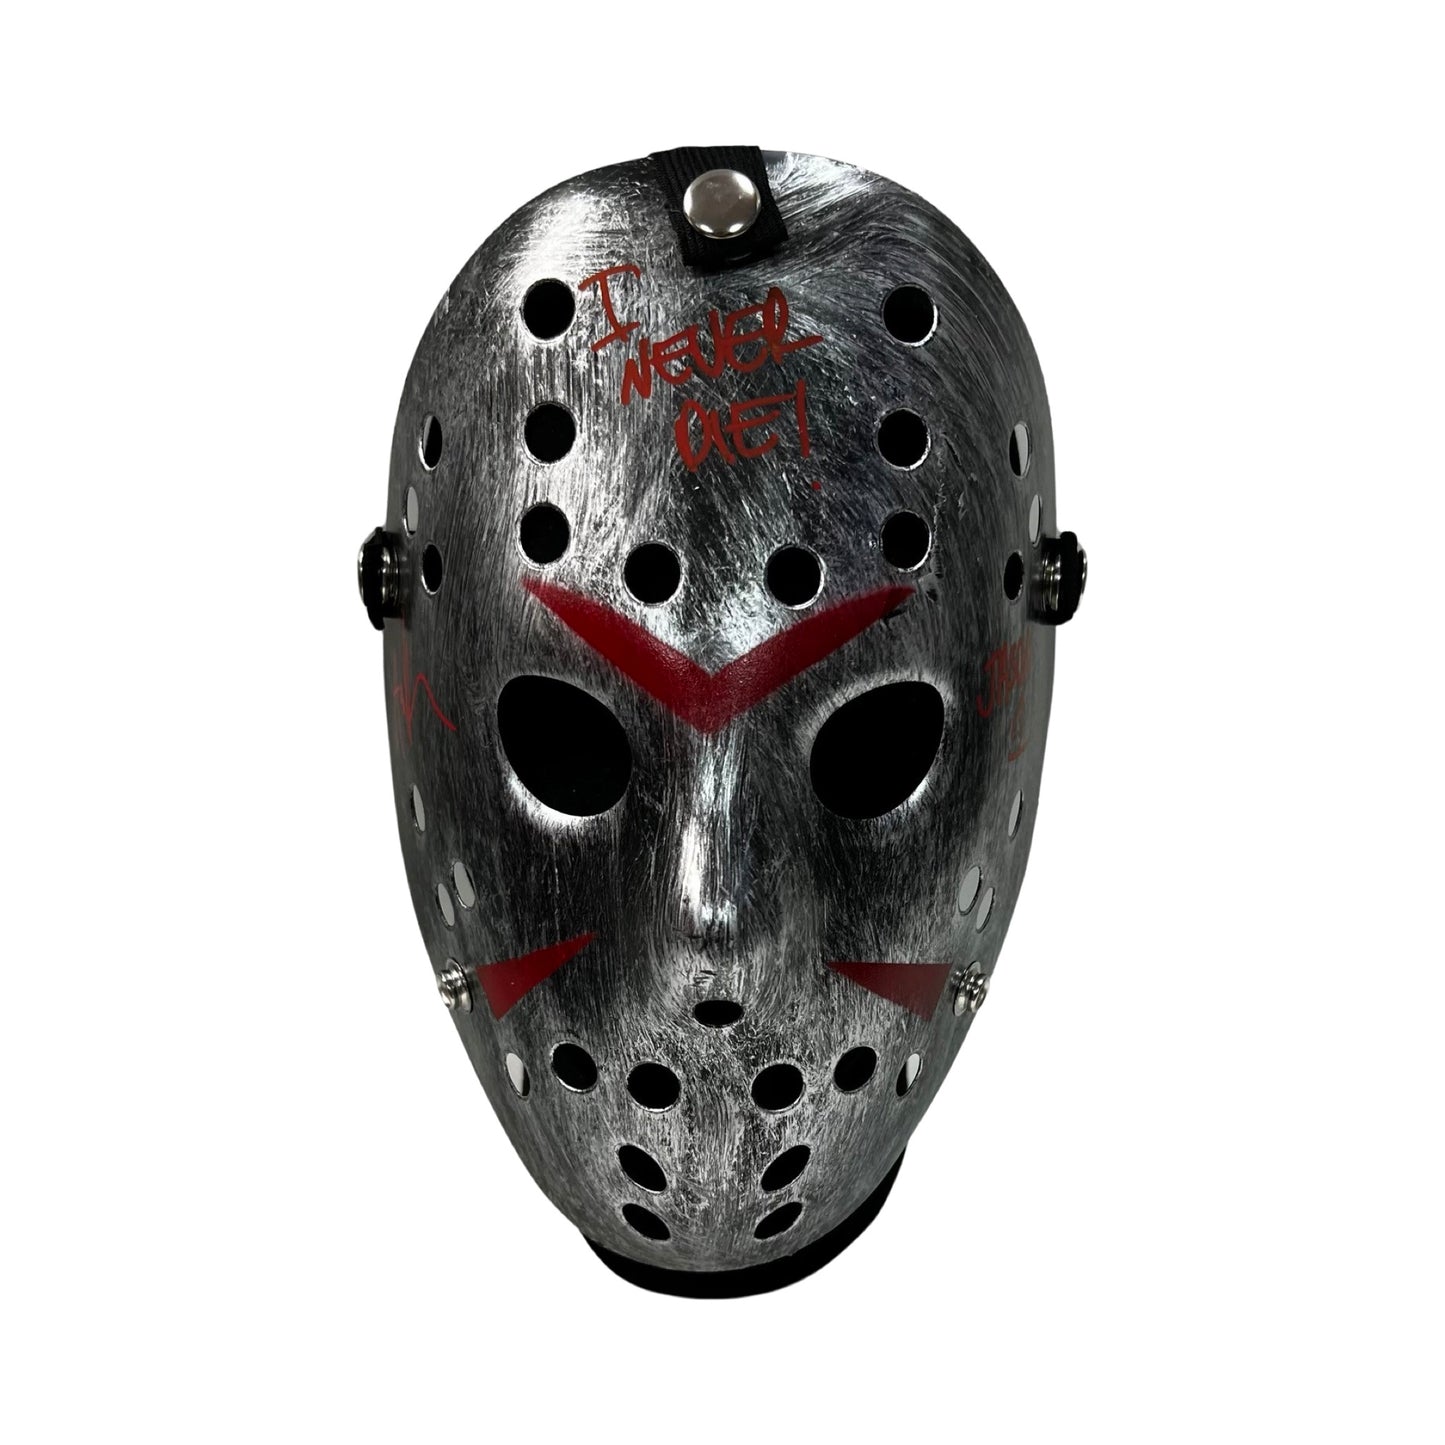 Ari Lehman Autographed Jason Voorhees Friday the 13th Silver Mask “I Never Die!, Jason 1” Inscriptions Red Ink Steiner CX